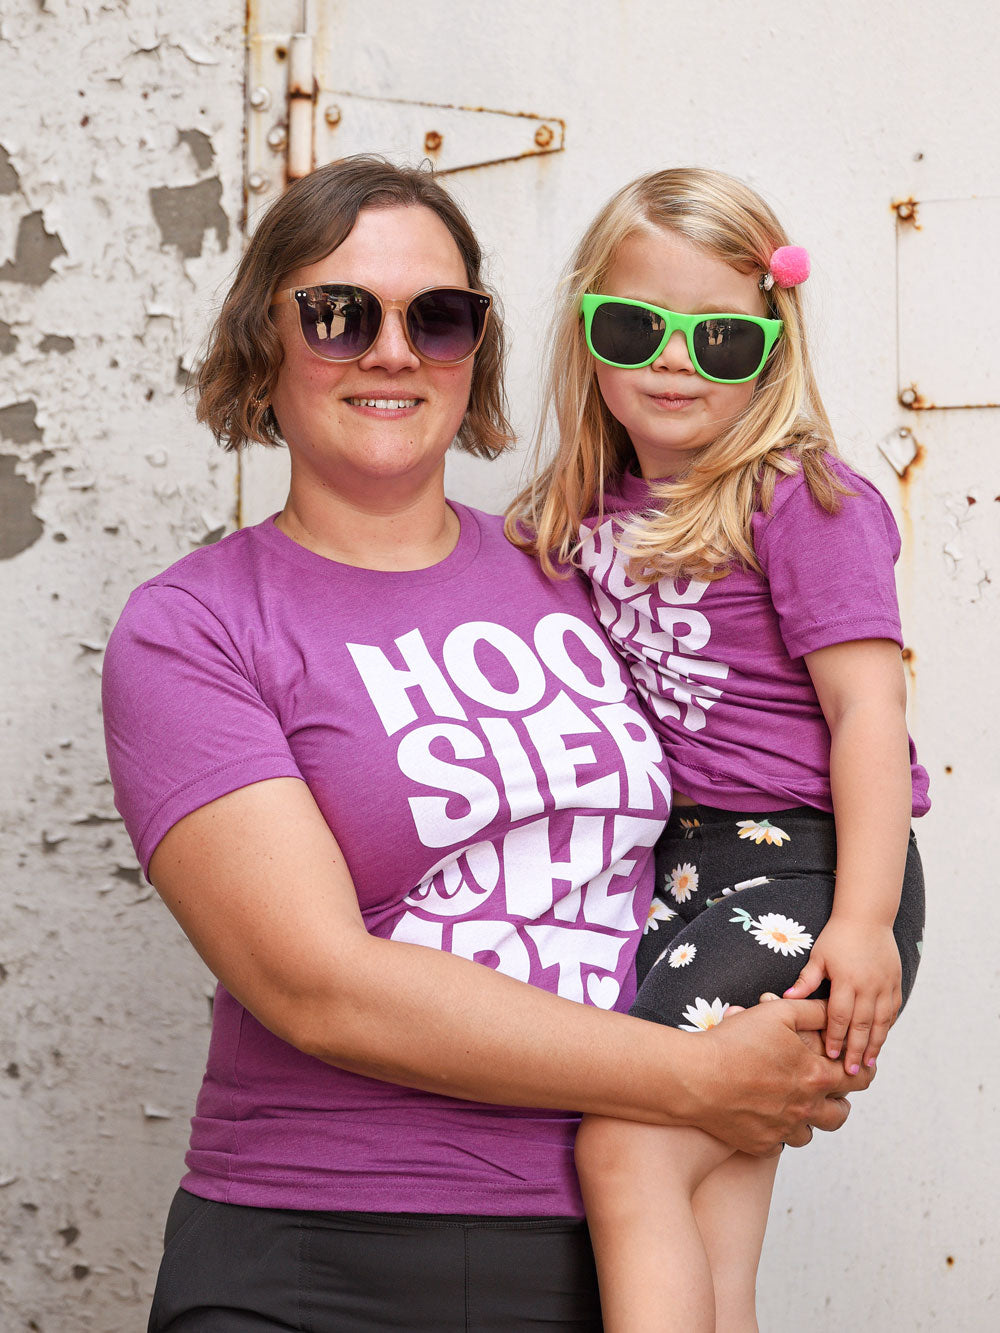 Hoosier at Heart magenta heather t-shirt on mom and daughter in sunglasses